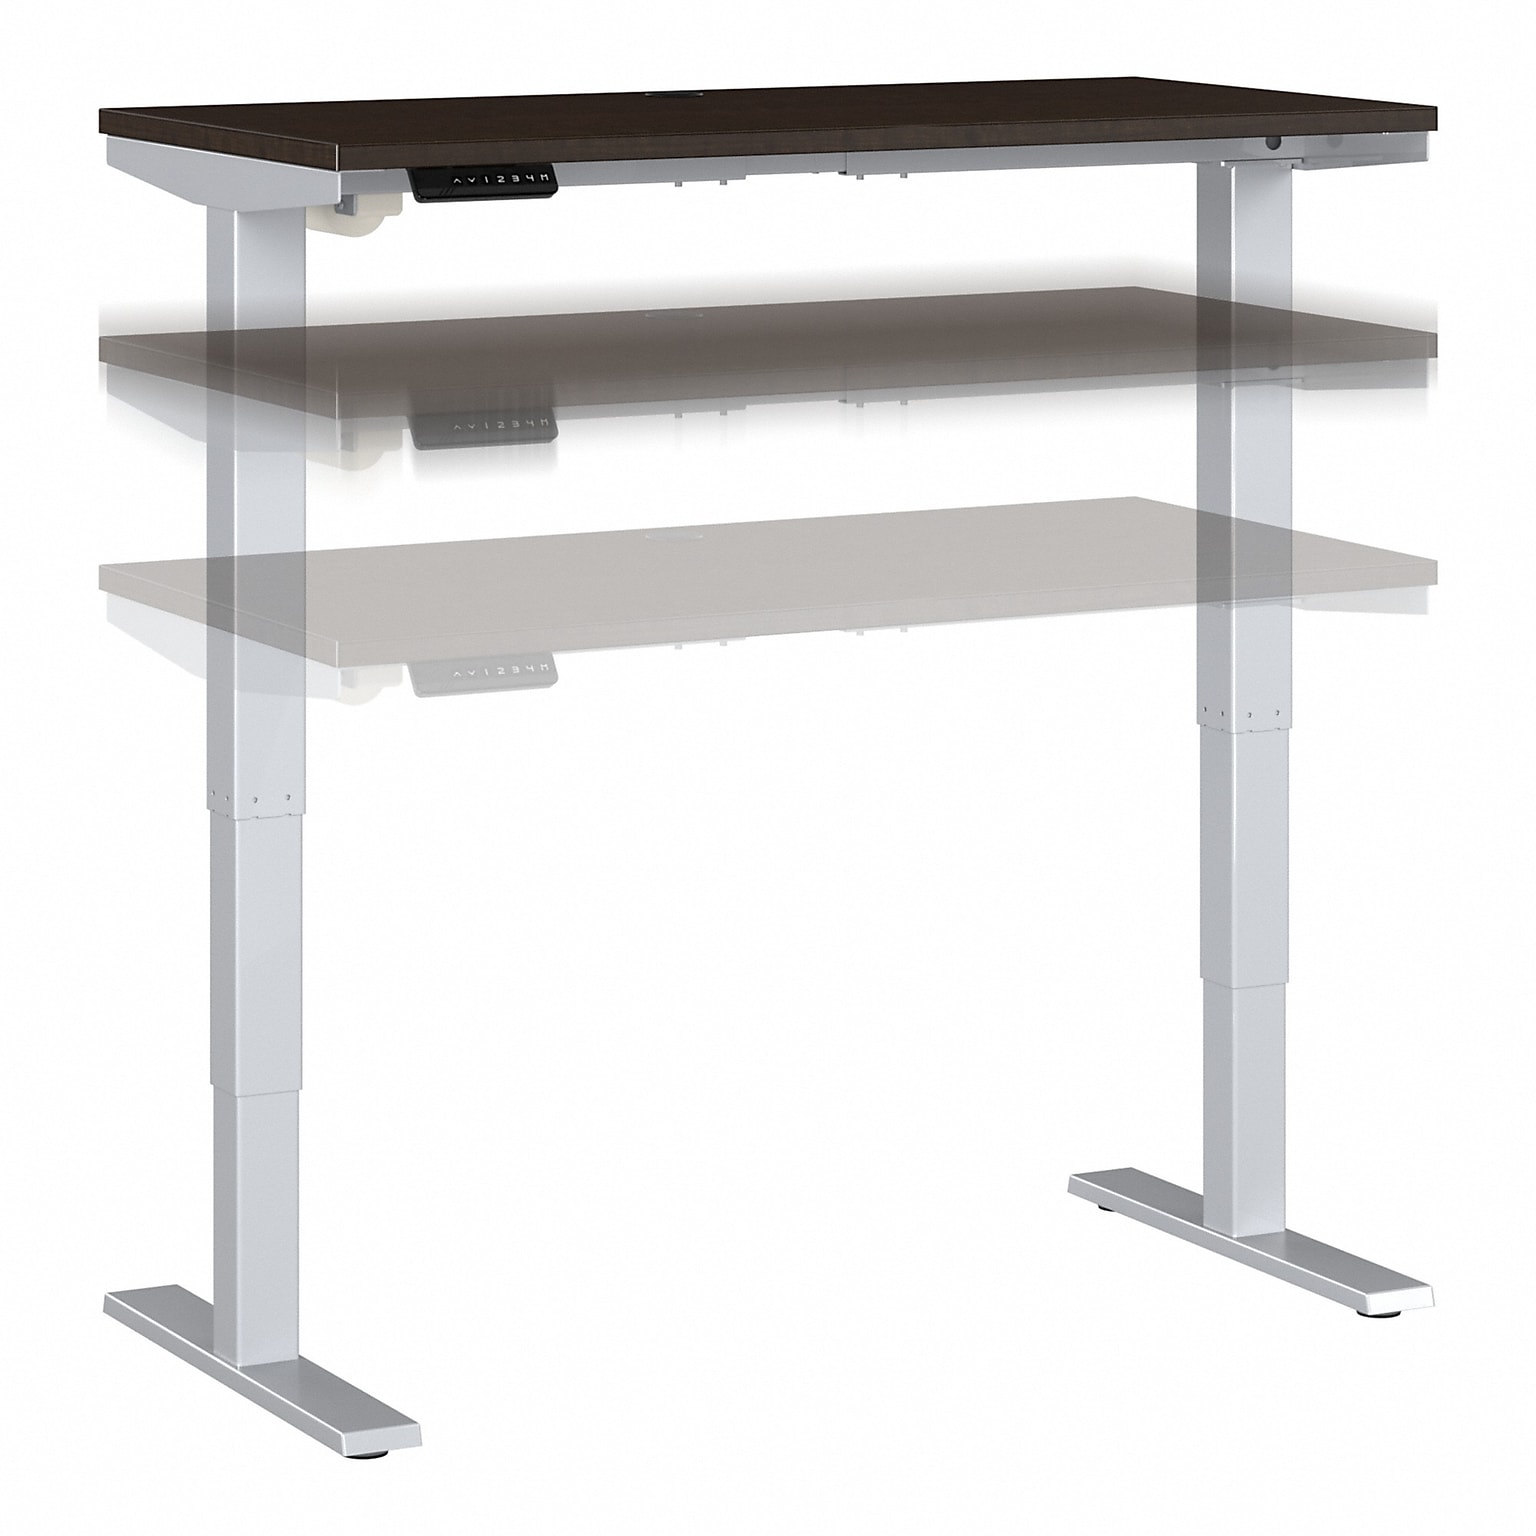 Bush Business Furniture Move 40 Series 48W Electric Height Adjustable Standing Desk, Mocha Cherry/Cool Gray (M4S4824MRSK)